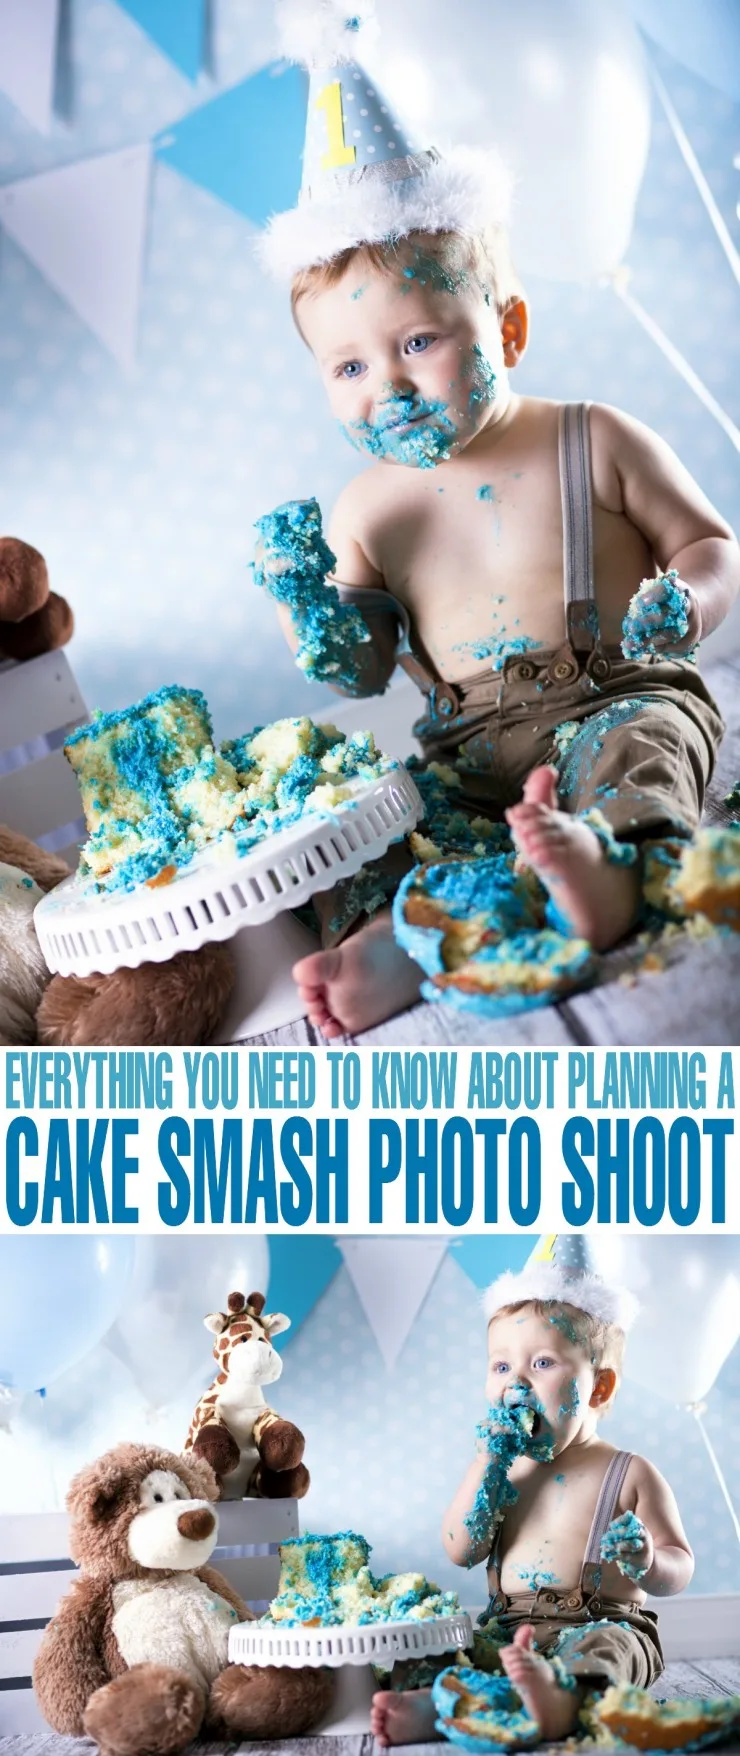 Everything You Need to Know About Planning a Cake Smash Photo Shoot for your baby girl or baby boy on their first birthday!